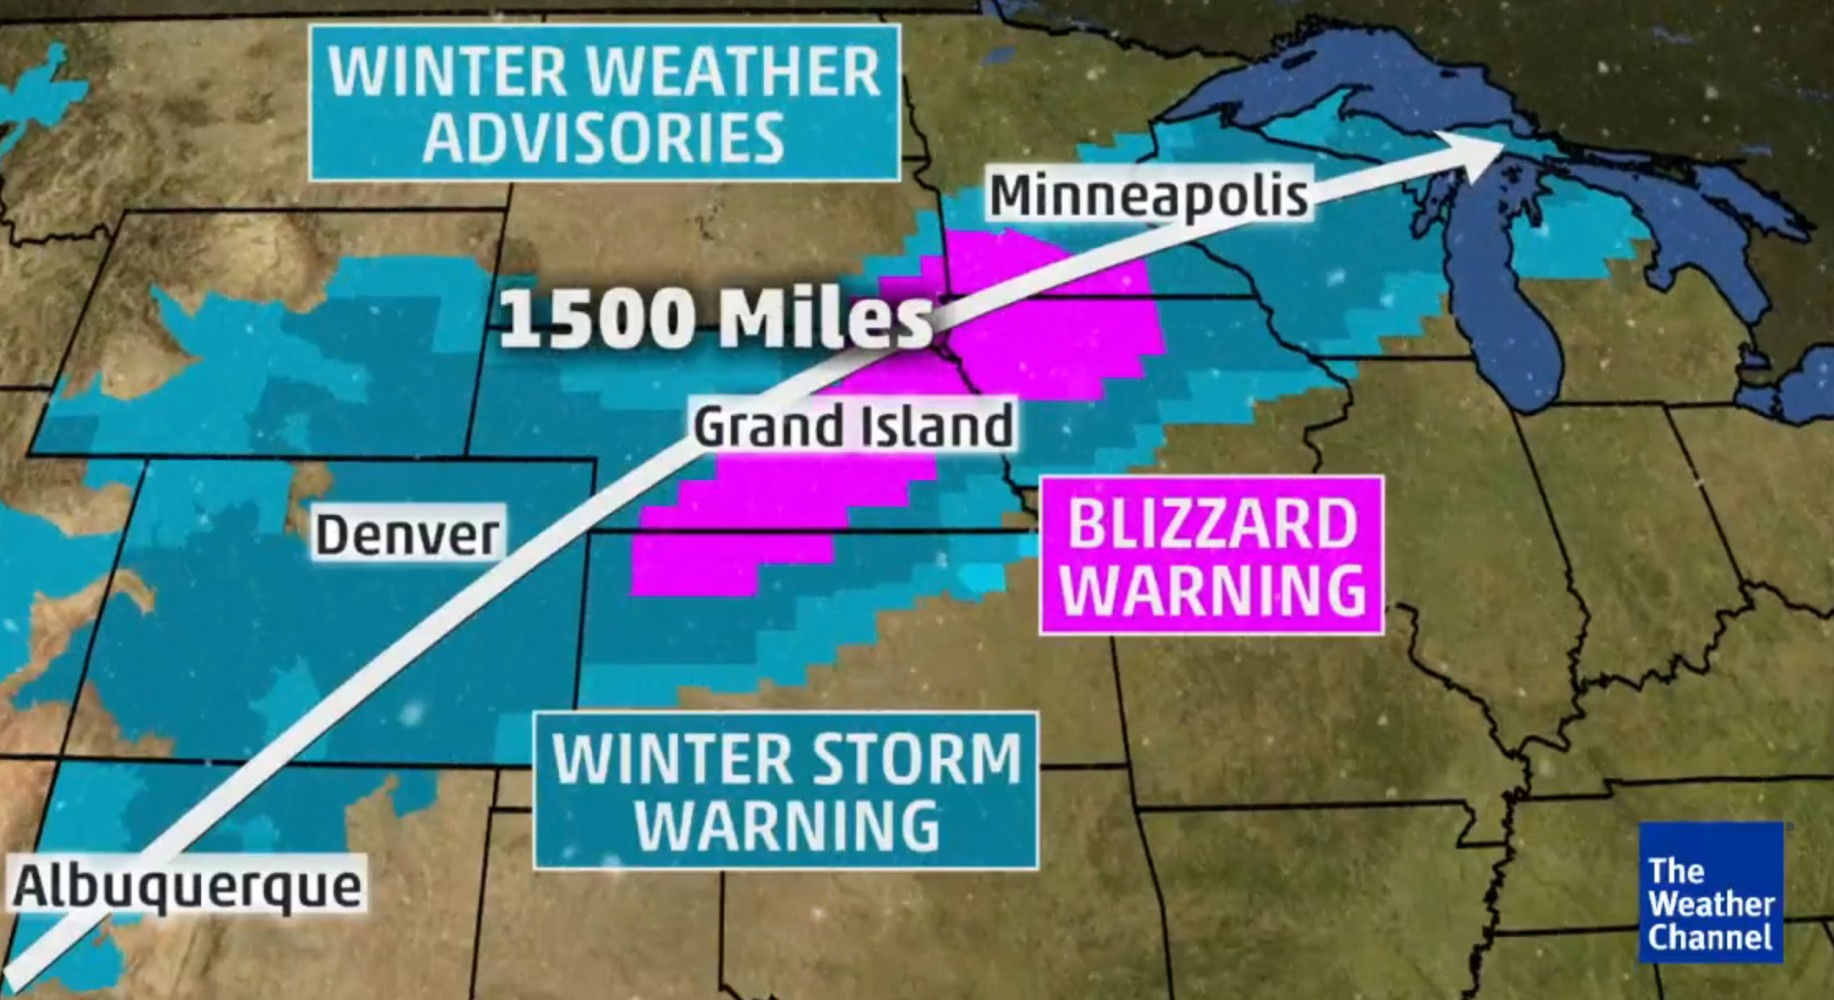 Snowstorm, 60MPH Winds Threaten Blizzards Across Plains and Midwest